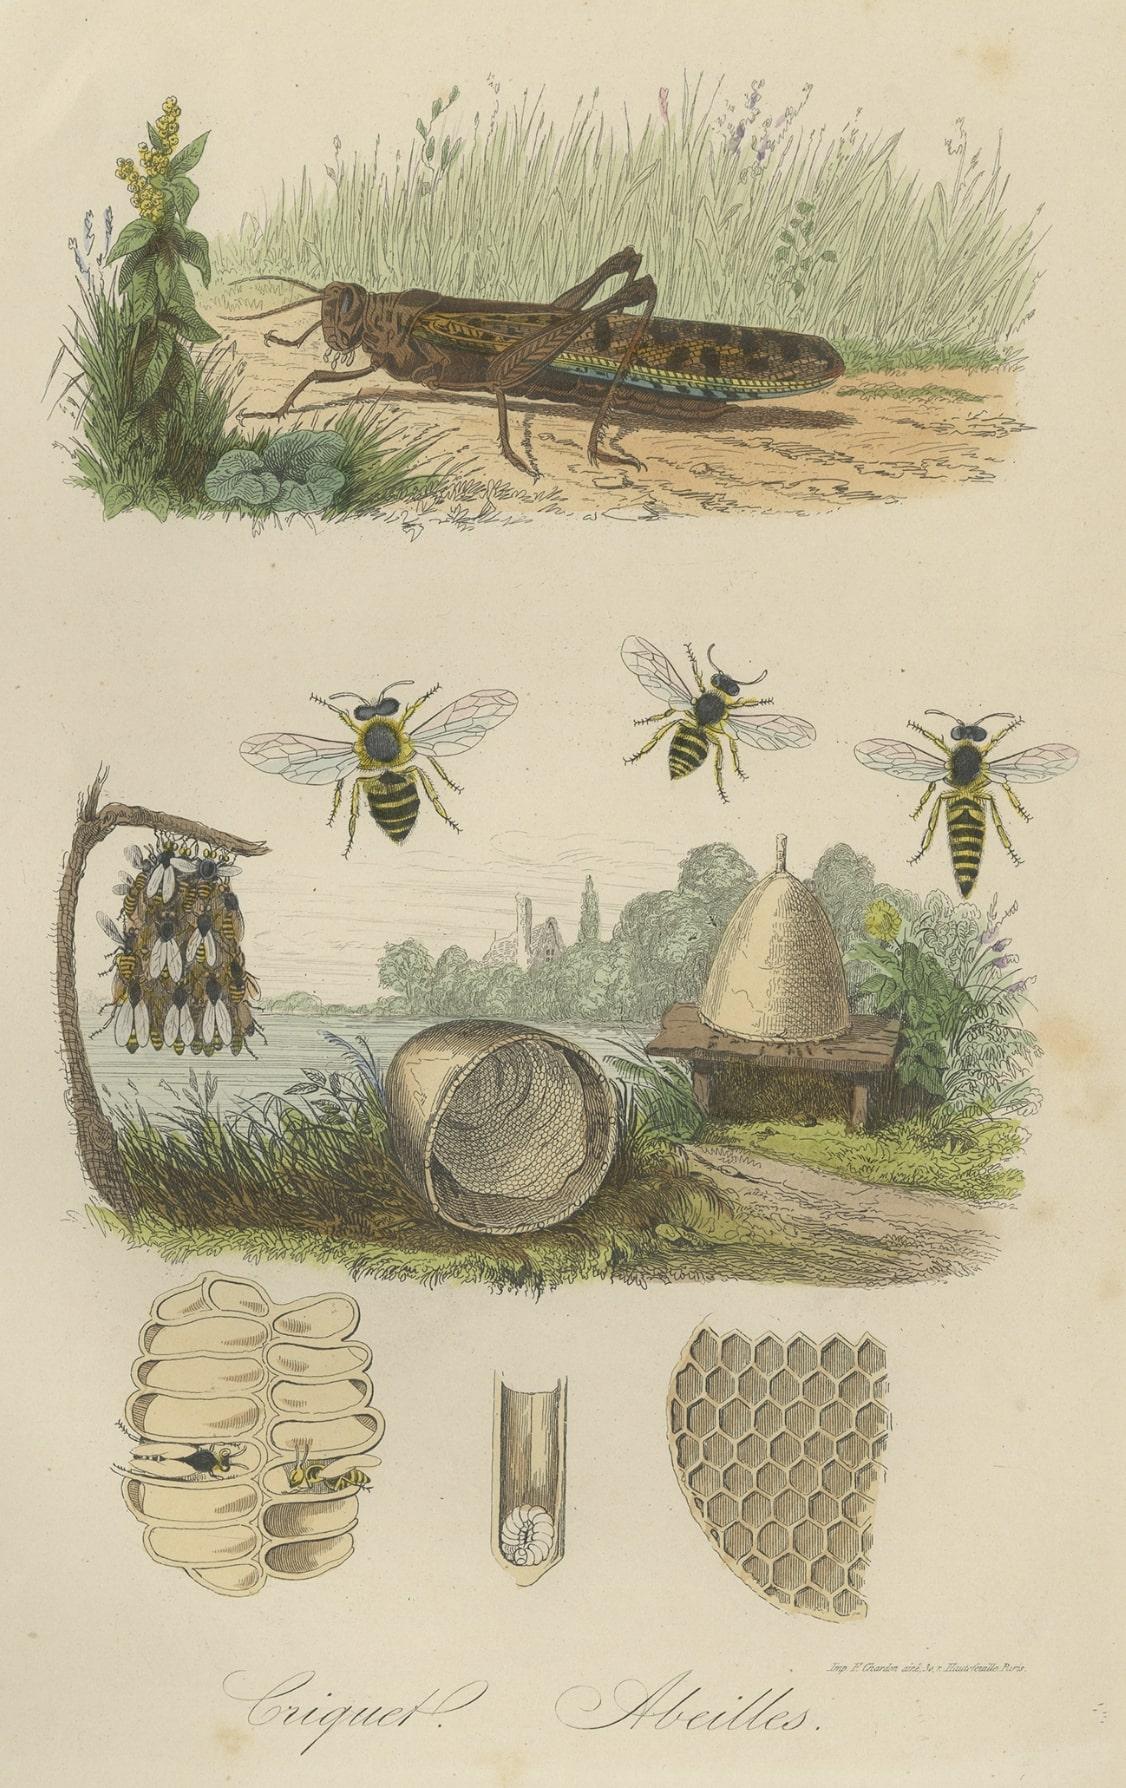 Antique Print of a Grasshopper and Bees, 1854